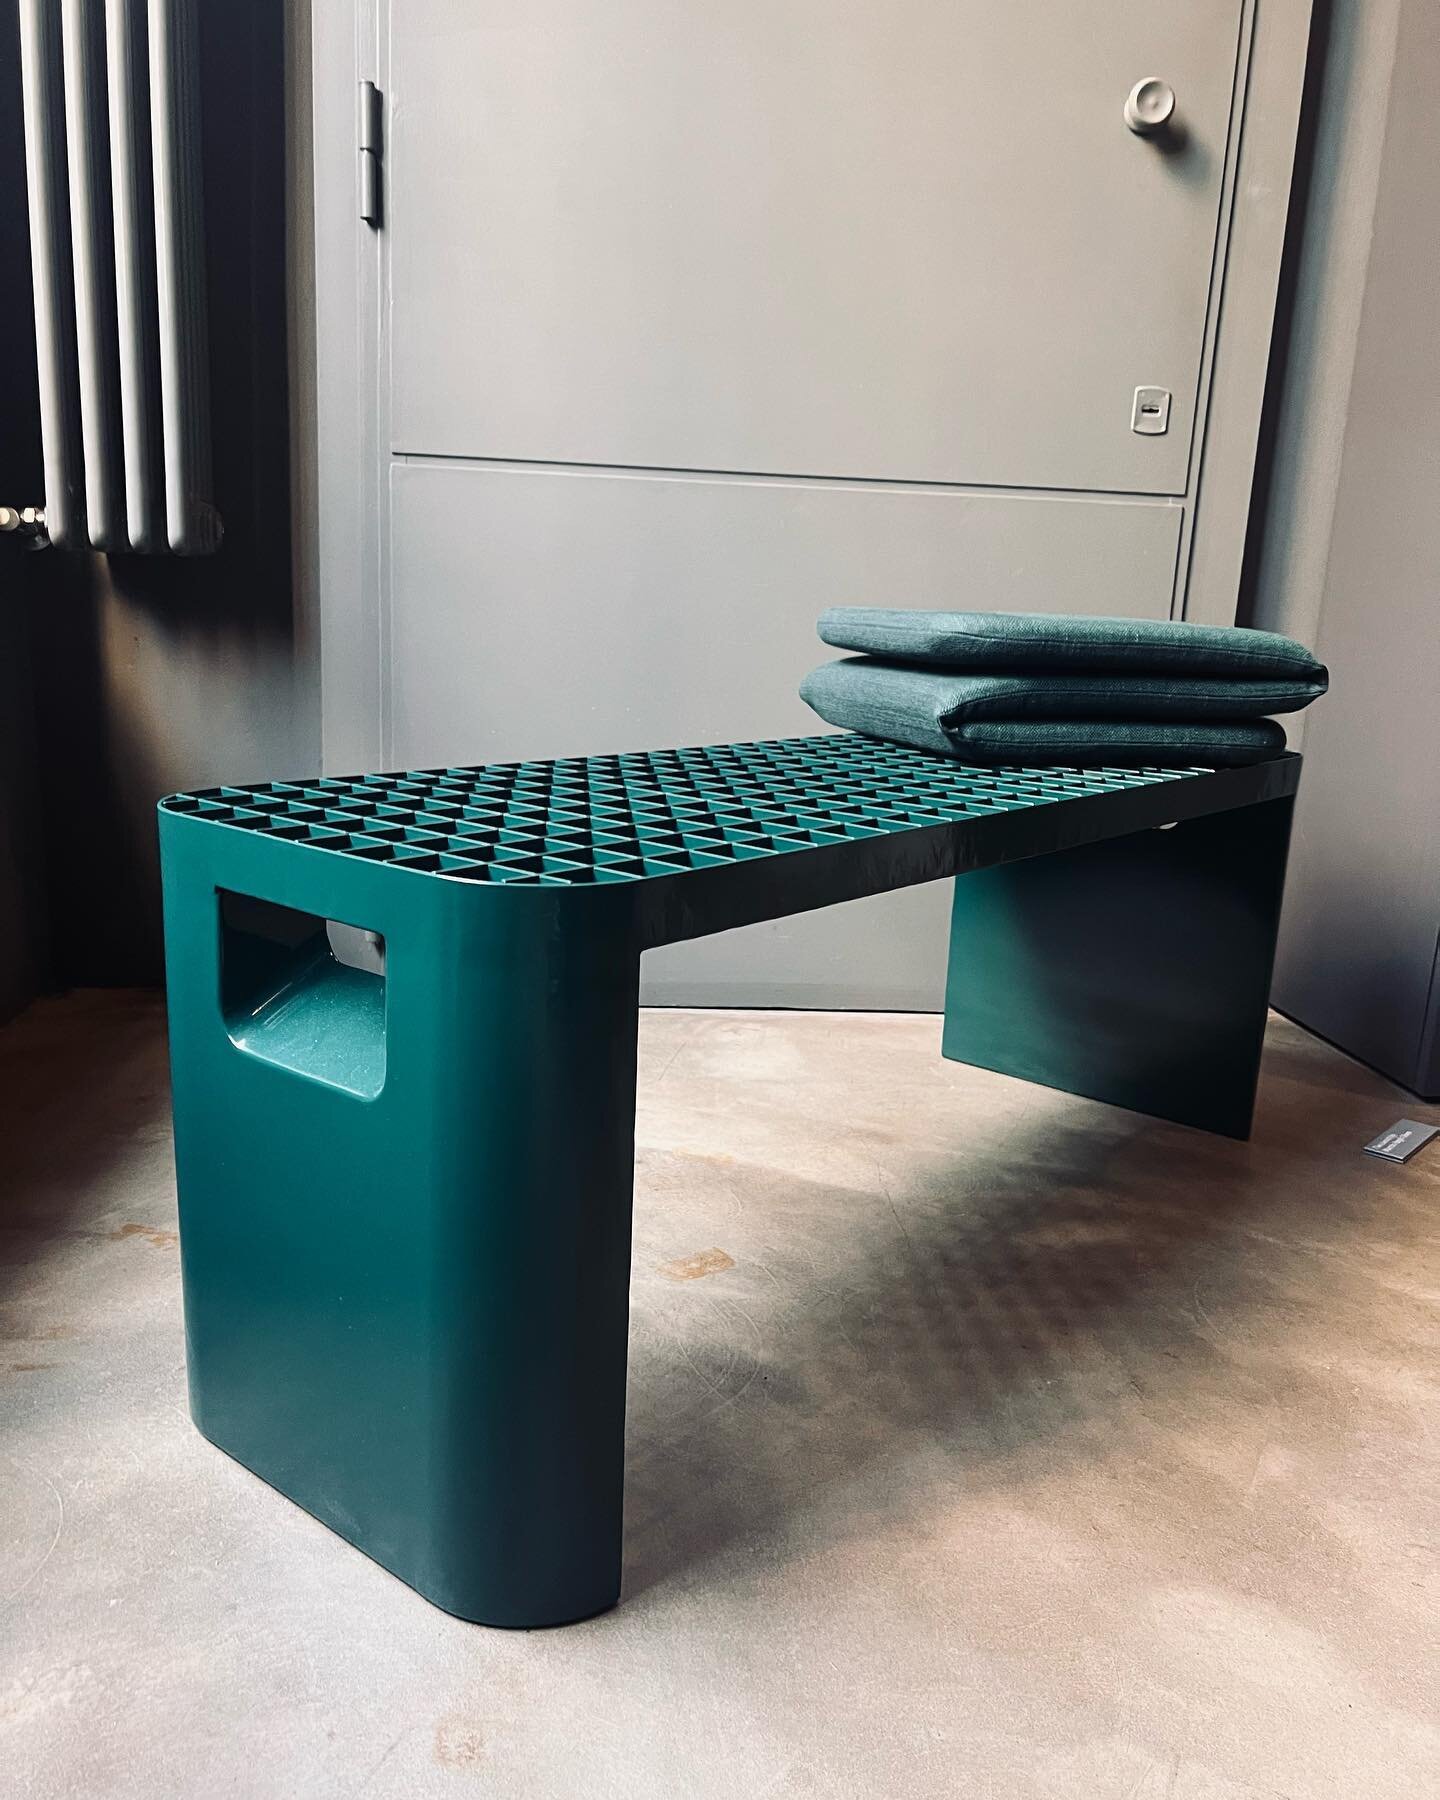 If in Milan, don&rsquo;t miss out on @norwegianpresence 📍Via Pietro Maroncelli 2, where I&rsquo;m showing the One stool and Two bench - sponsored by @shapesbyhydro - The Aluminum Knowledge Hub powered by @norskhydroasa and @innvik_as 

#martinhoegho